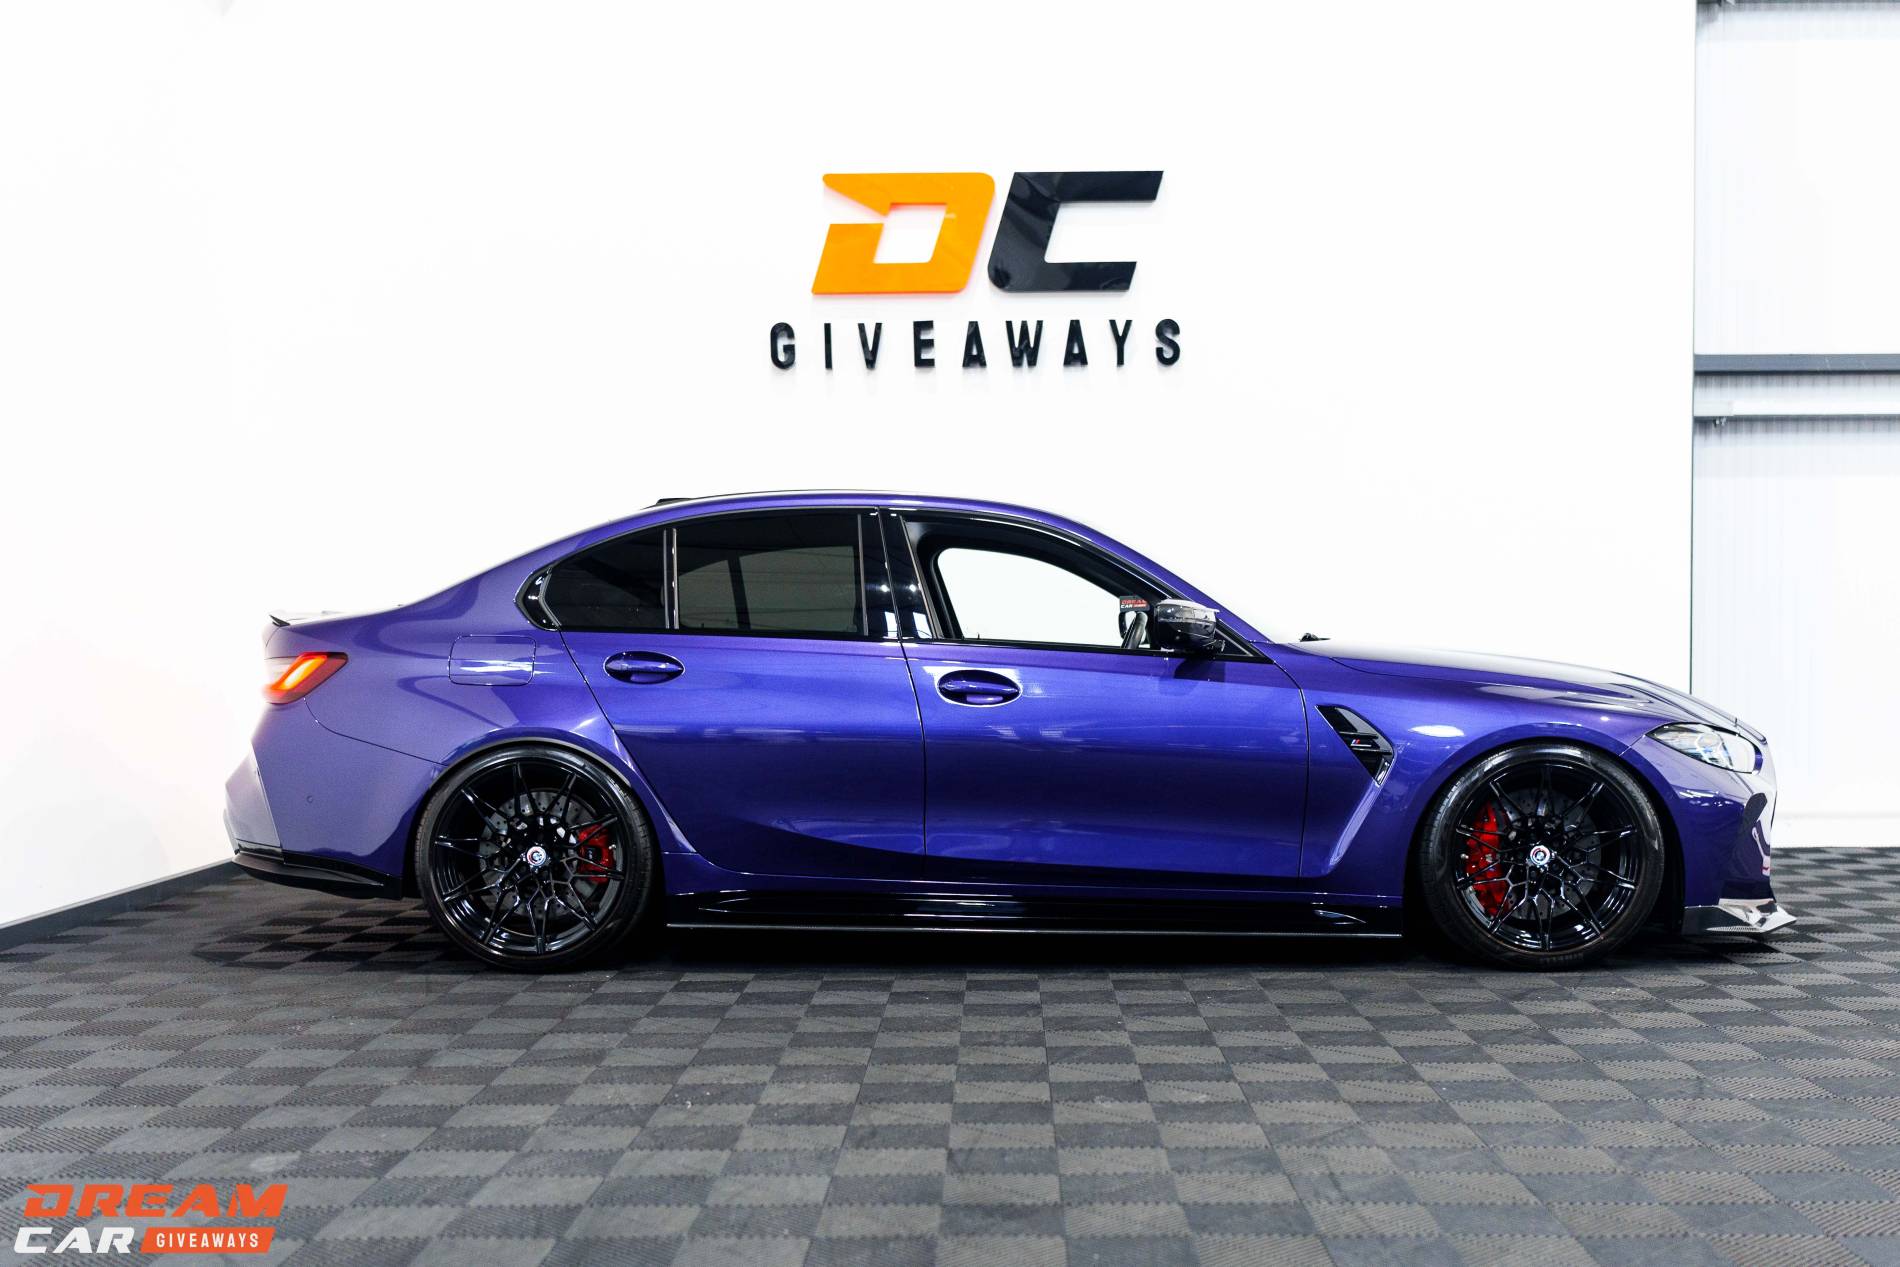 Win This 2022 BMW M3 & £1,000 or £62,000 Tax Free